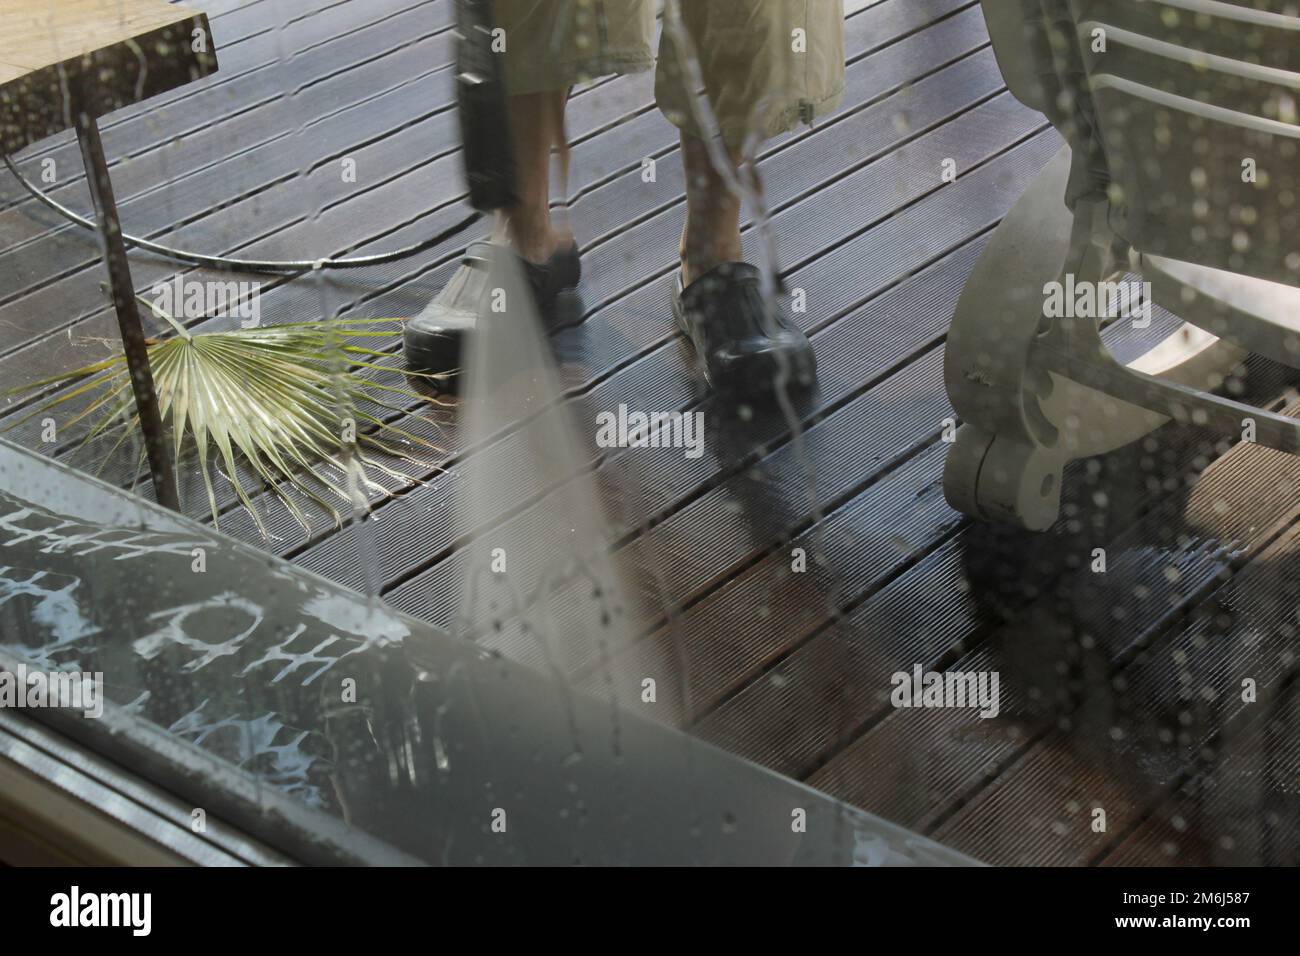 Power surface washing. Man cleaning terrace with a power washer. High water pressure cleaner on wooden terrace surface and outdoor furniture. Stock Photo